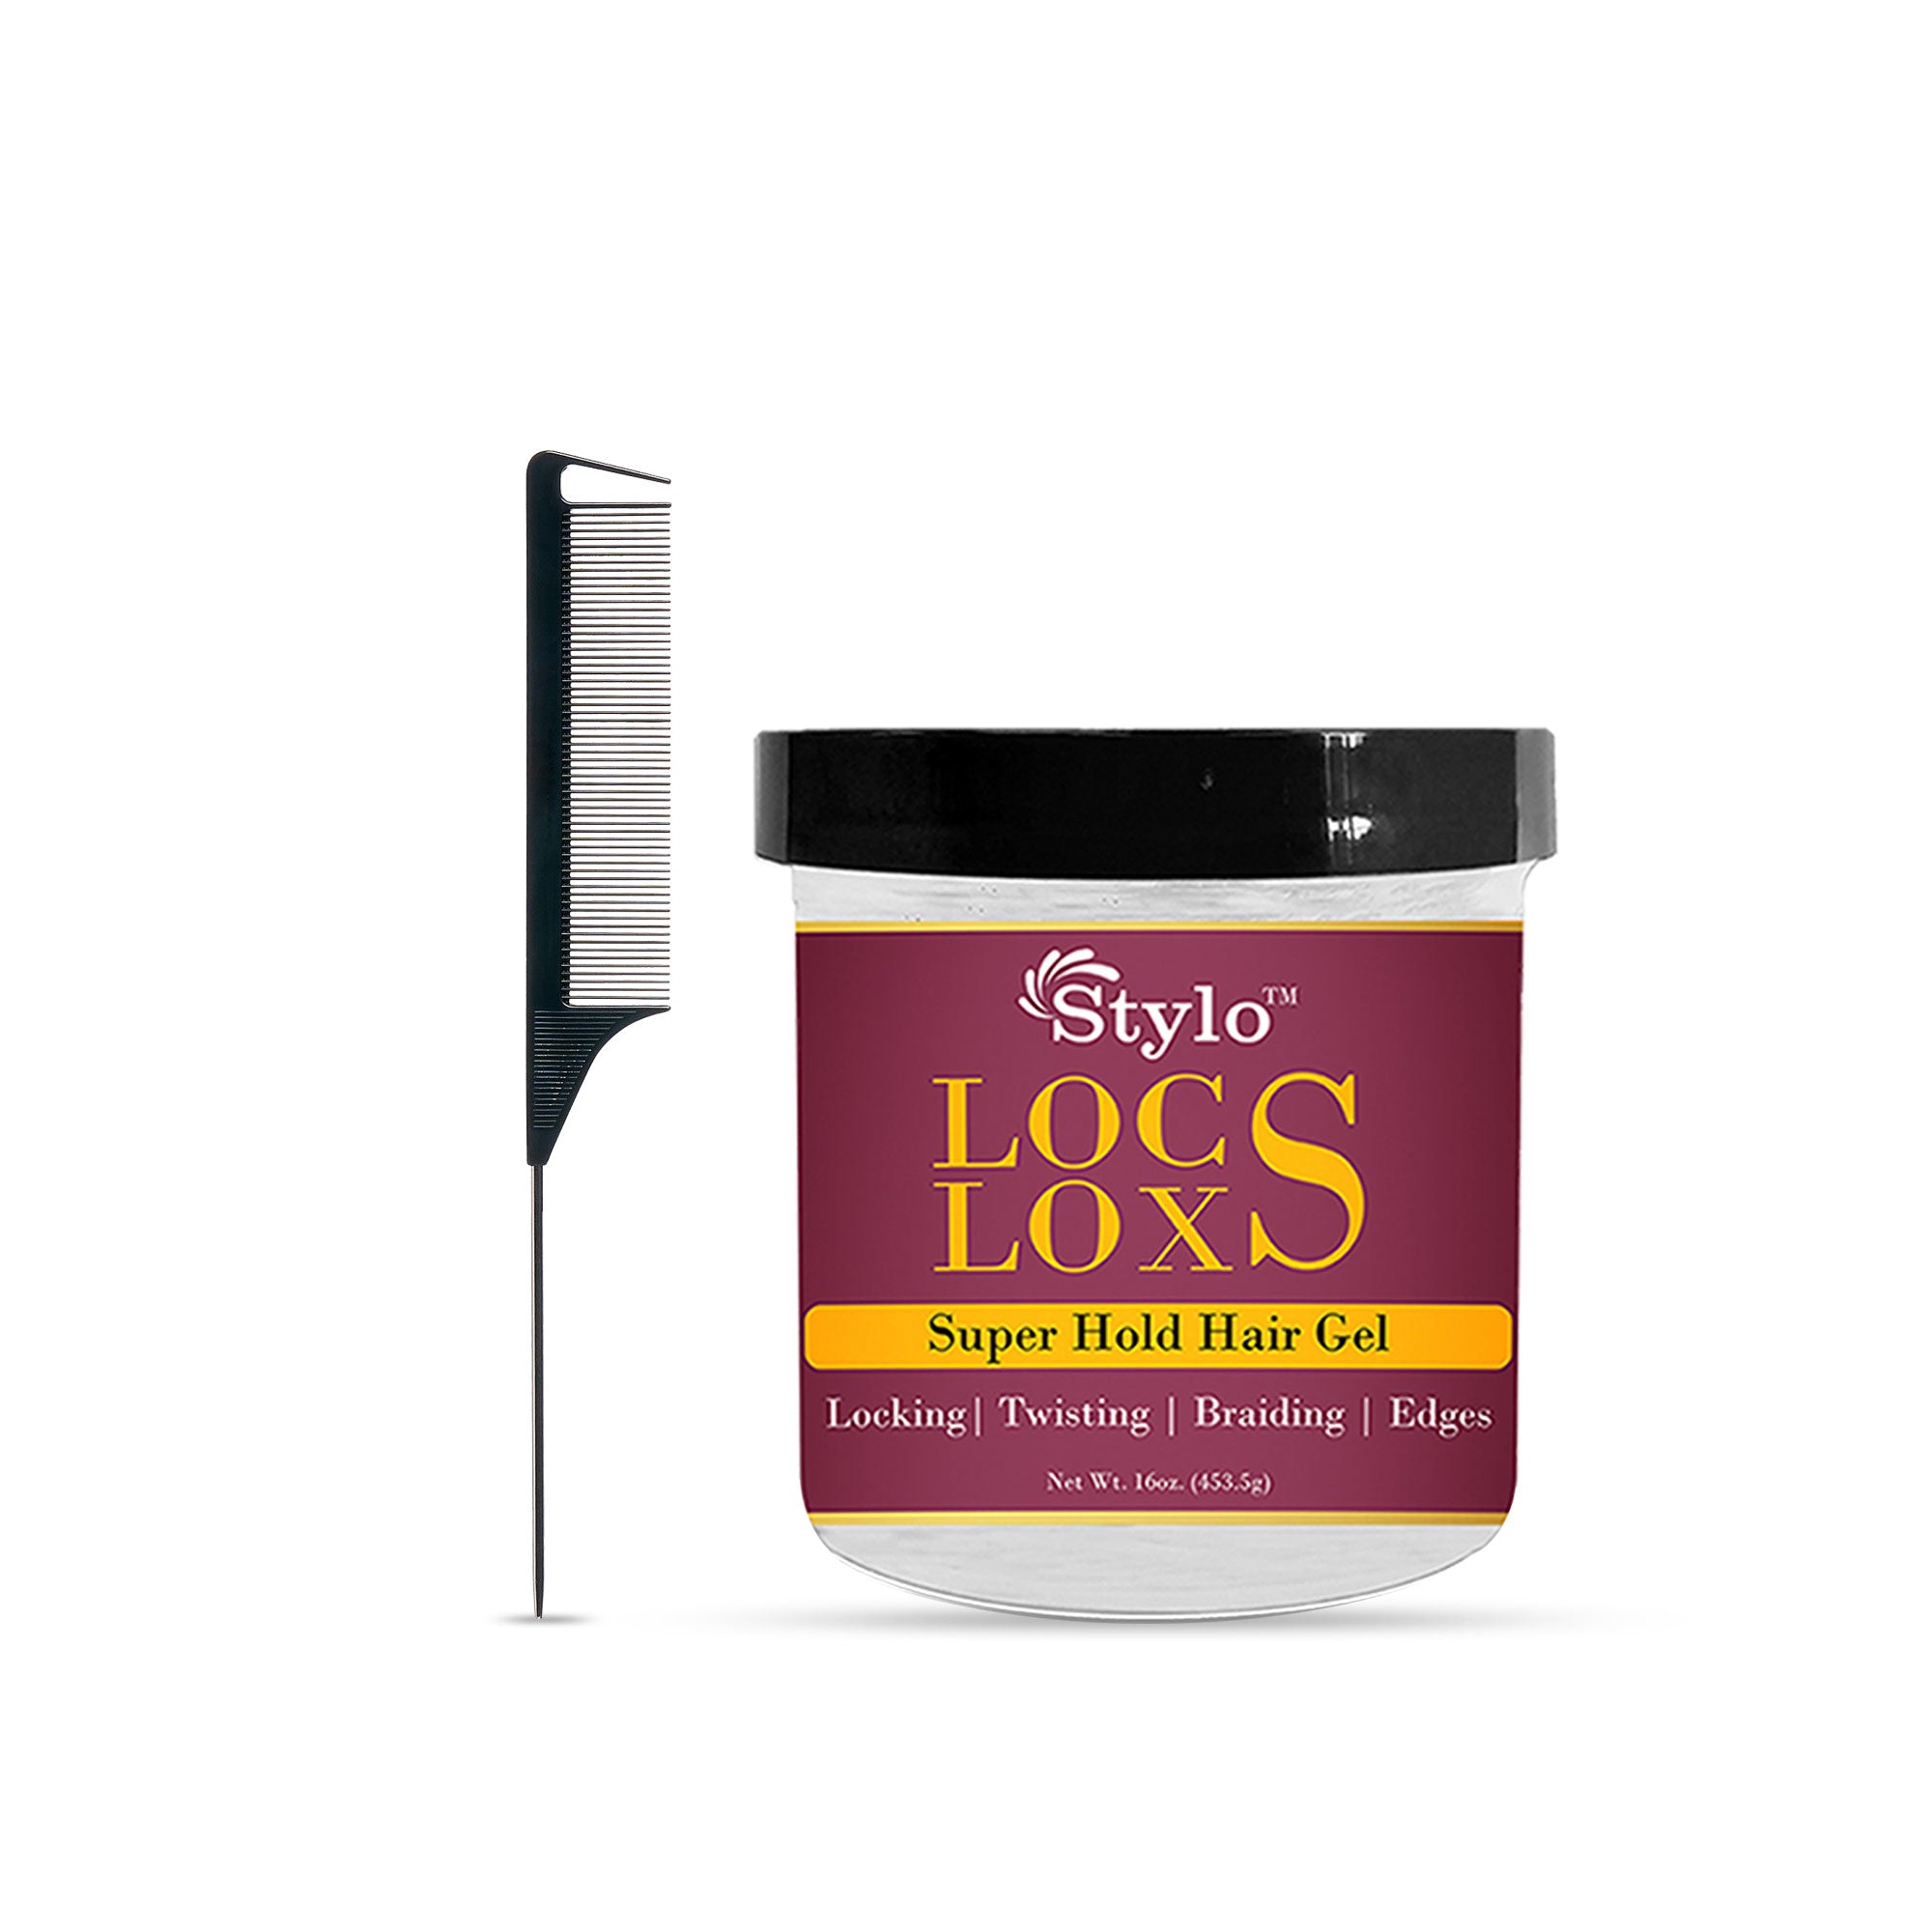 STYLO Locs Loxs Super Hold Hair Gel With Free Comb (16 Fl Oz)